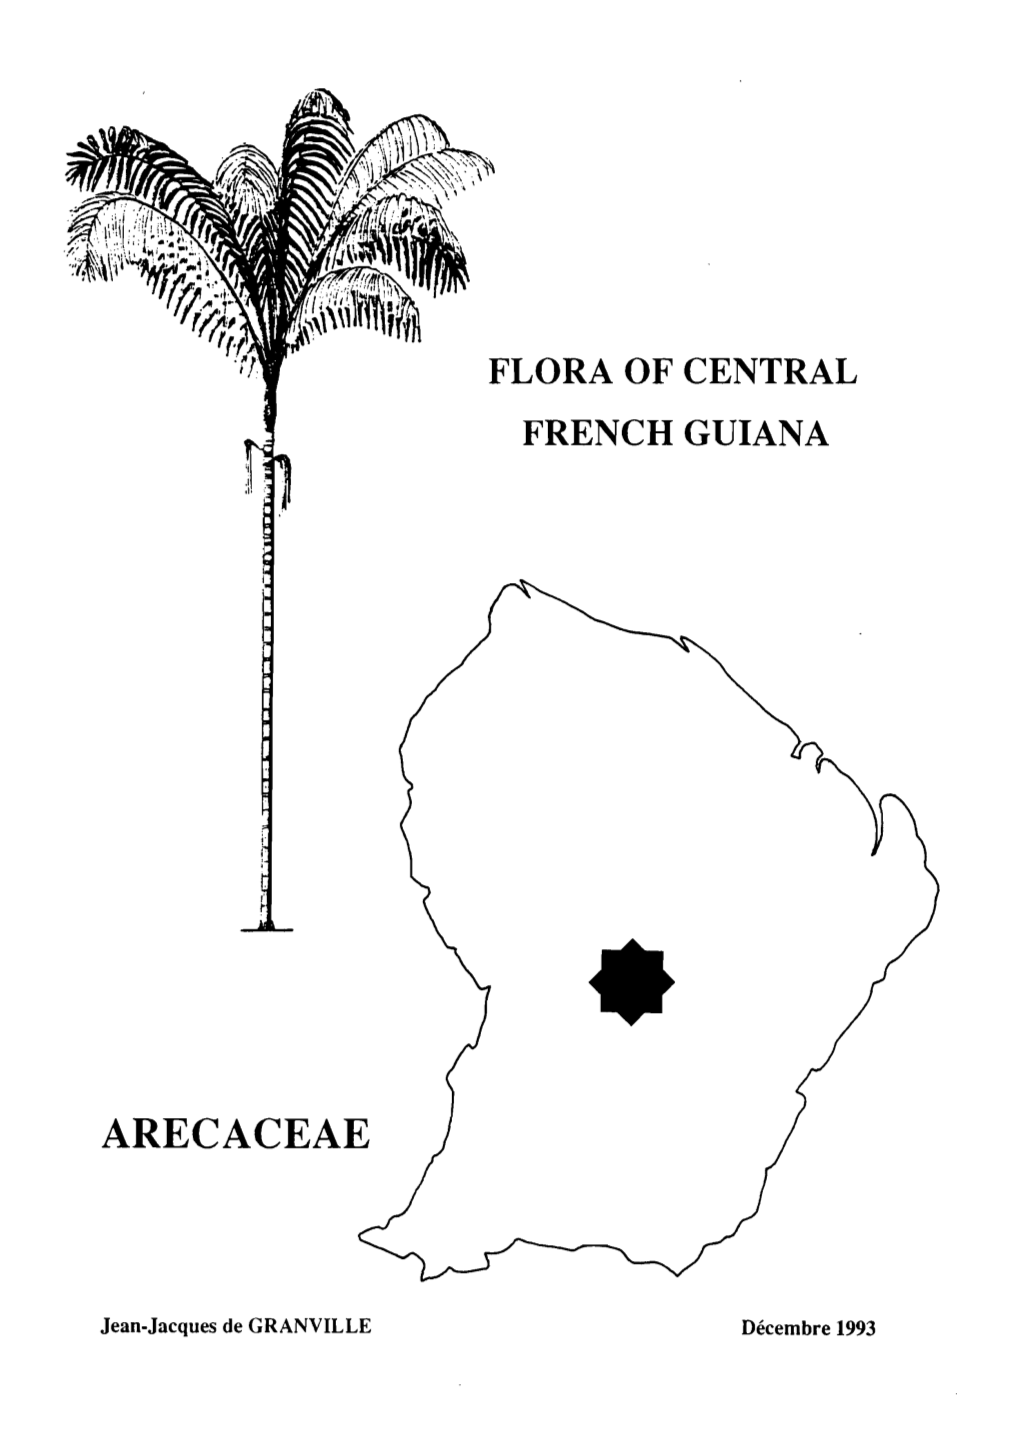 Flora of Central French Guiana : Arecaceae (Palm Family)